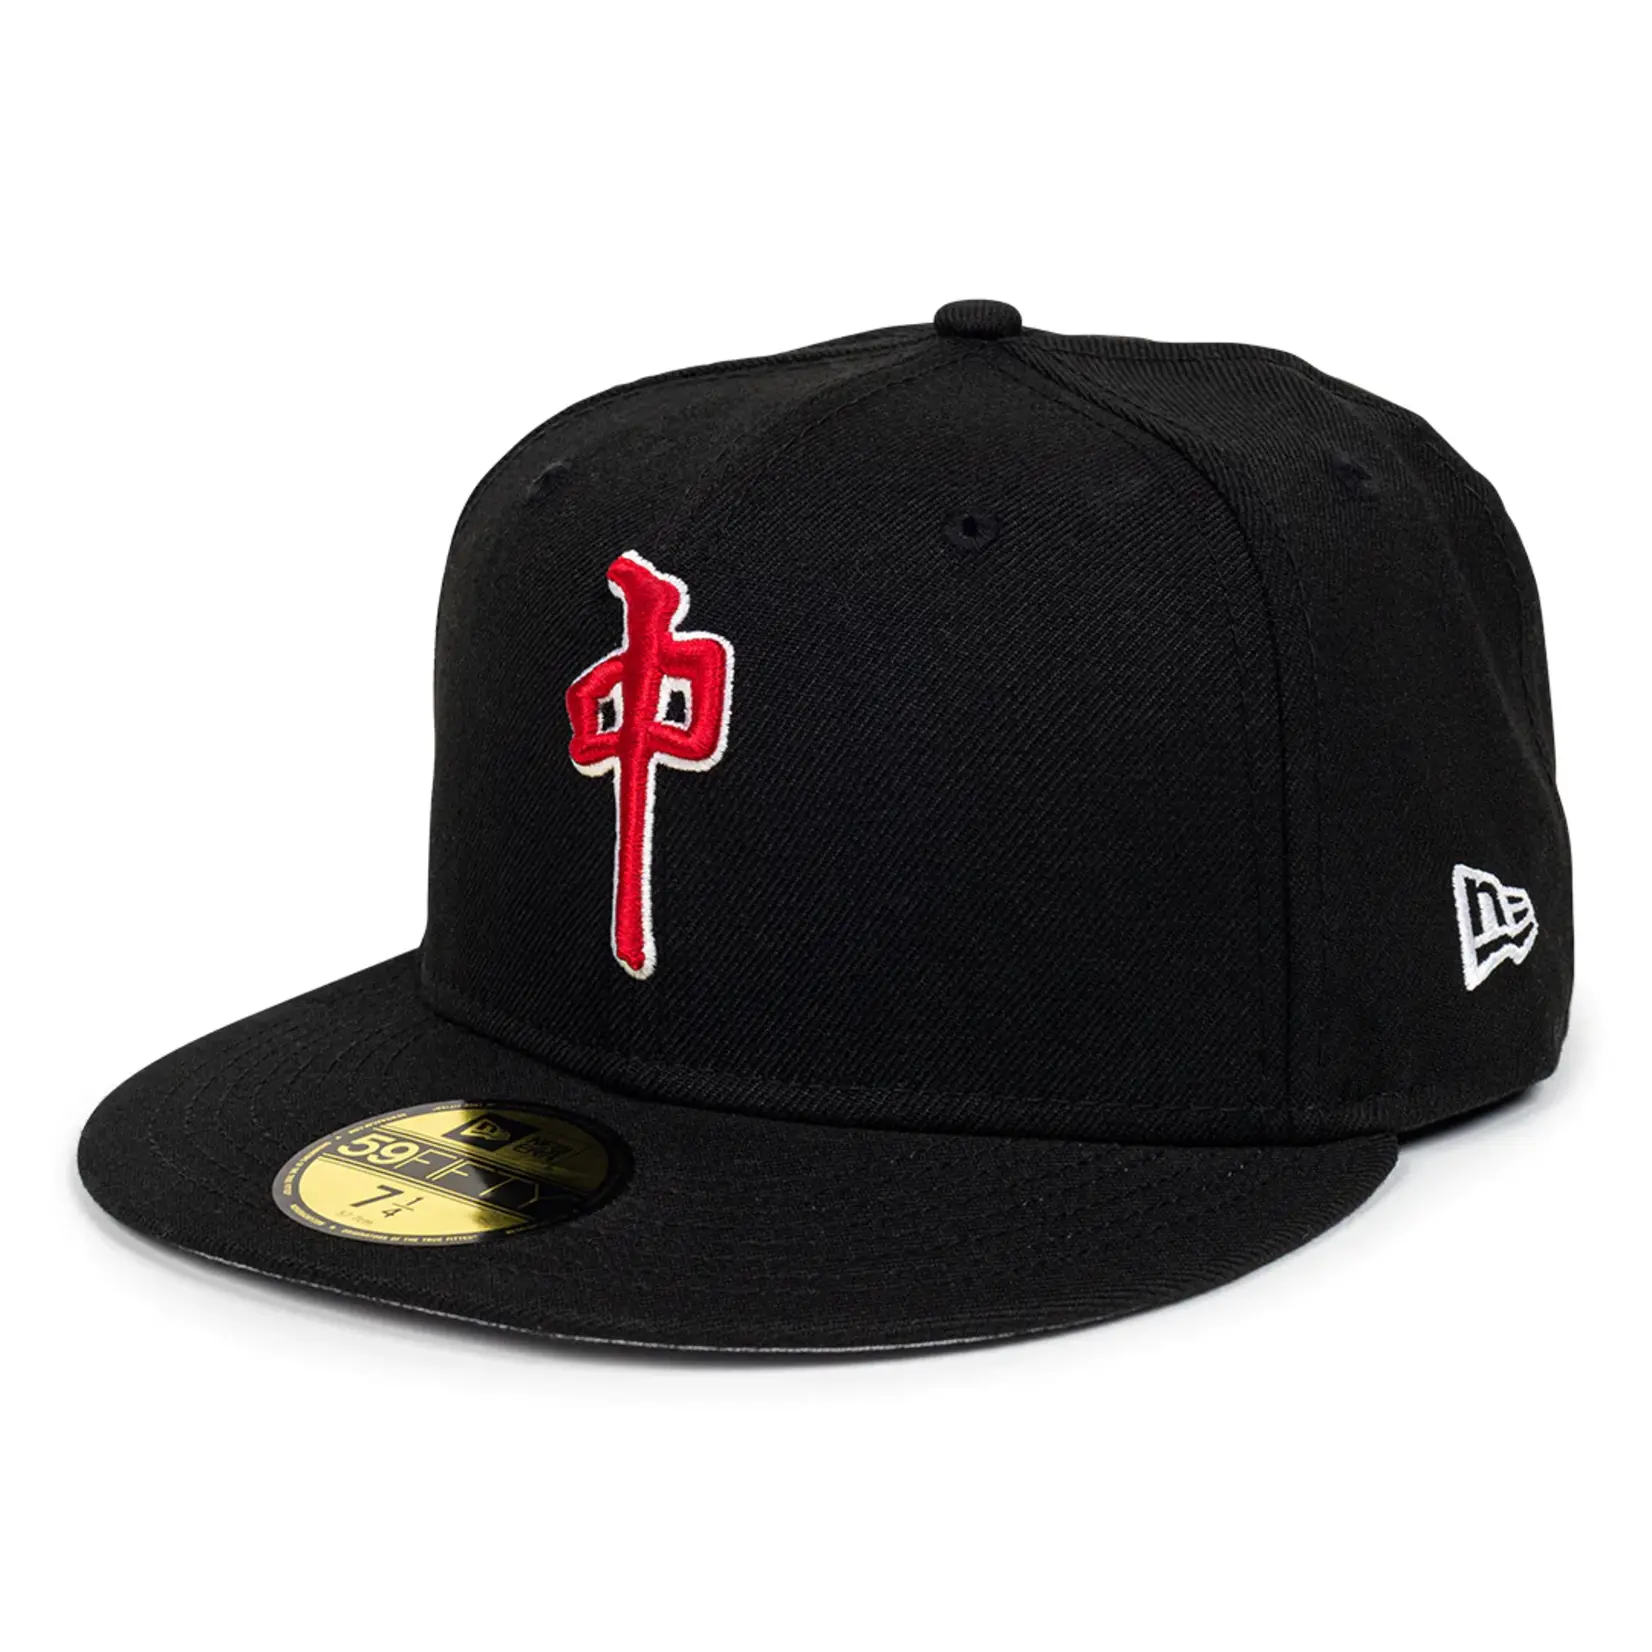 RDS RDS New Era Dynasty Hat - Black/Red